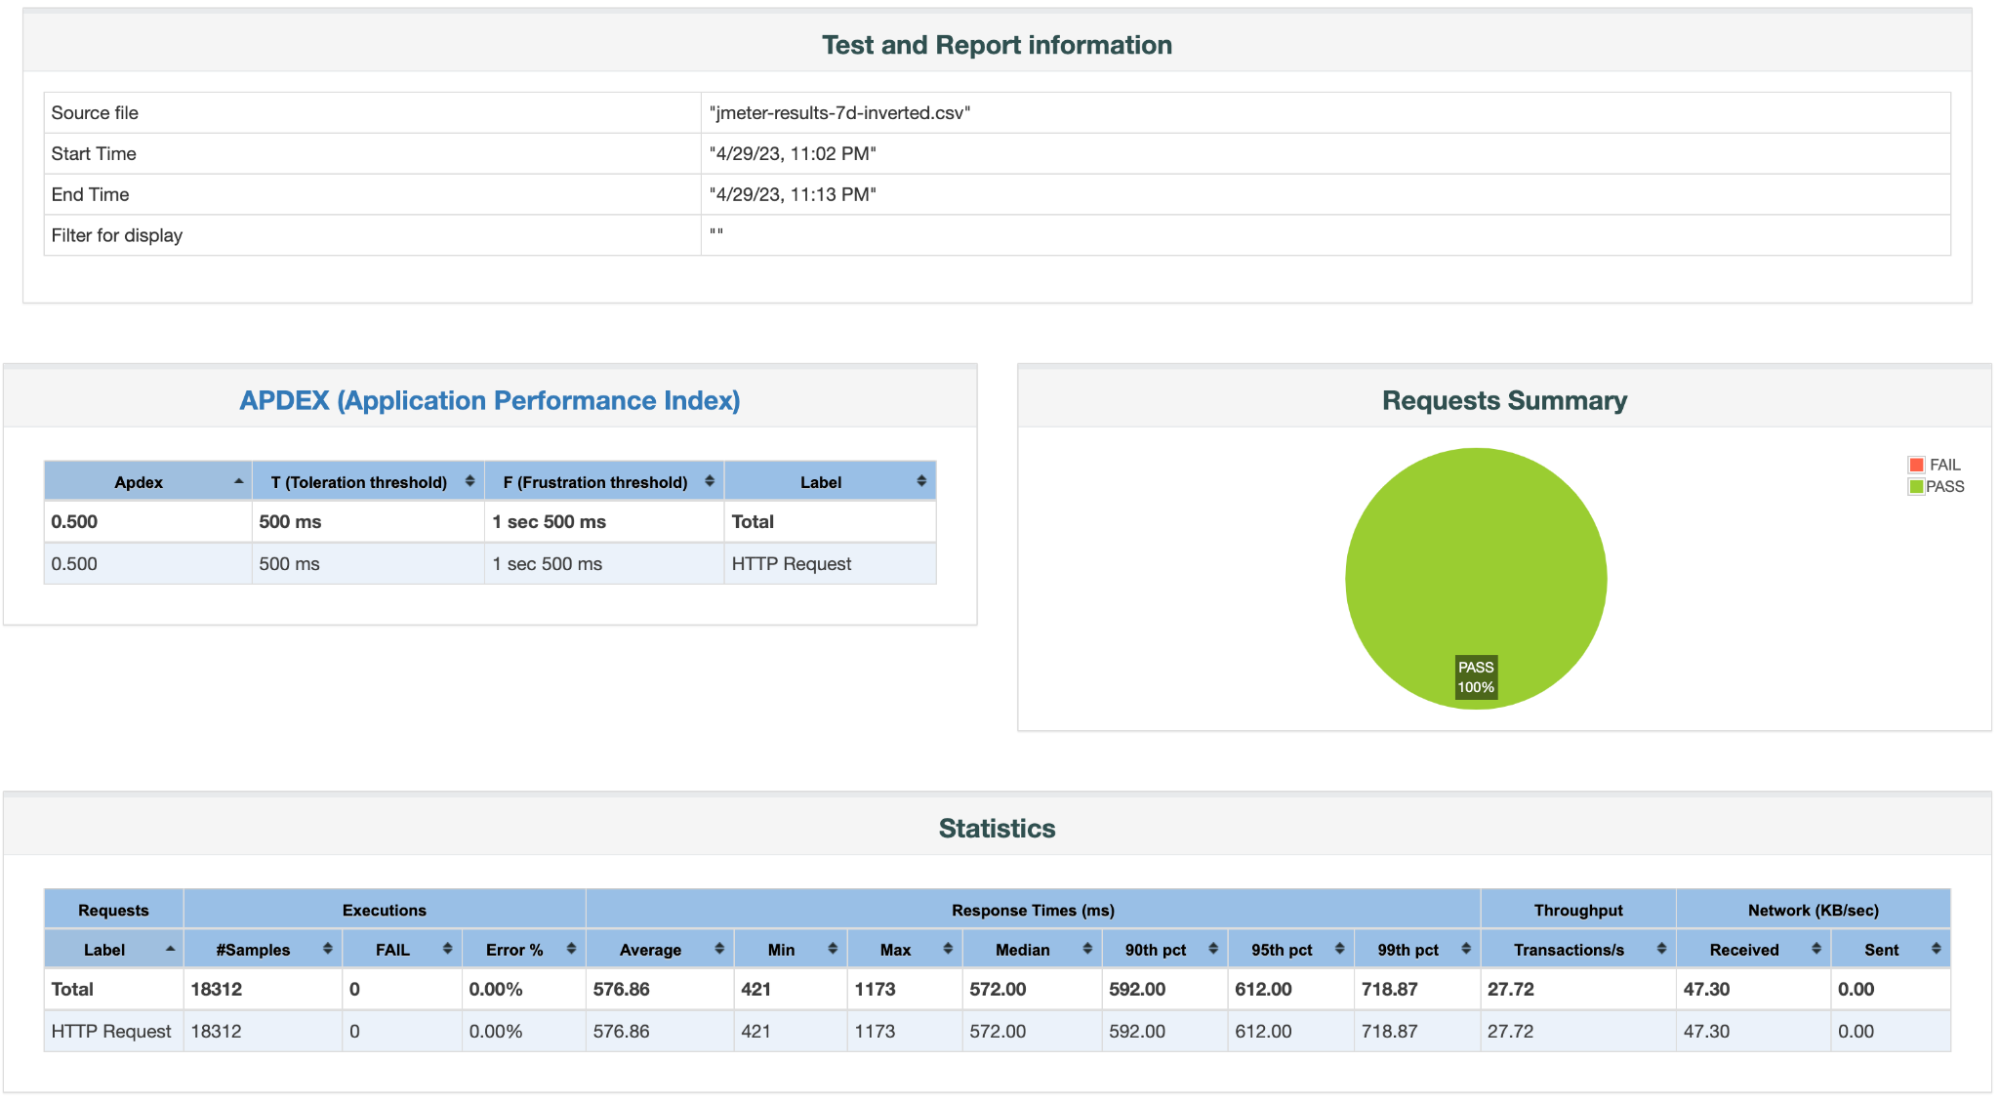 JMeter report with test and report information, APDEX, R for 16 concurrent threadsequests Summary, and Statistics